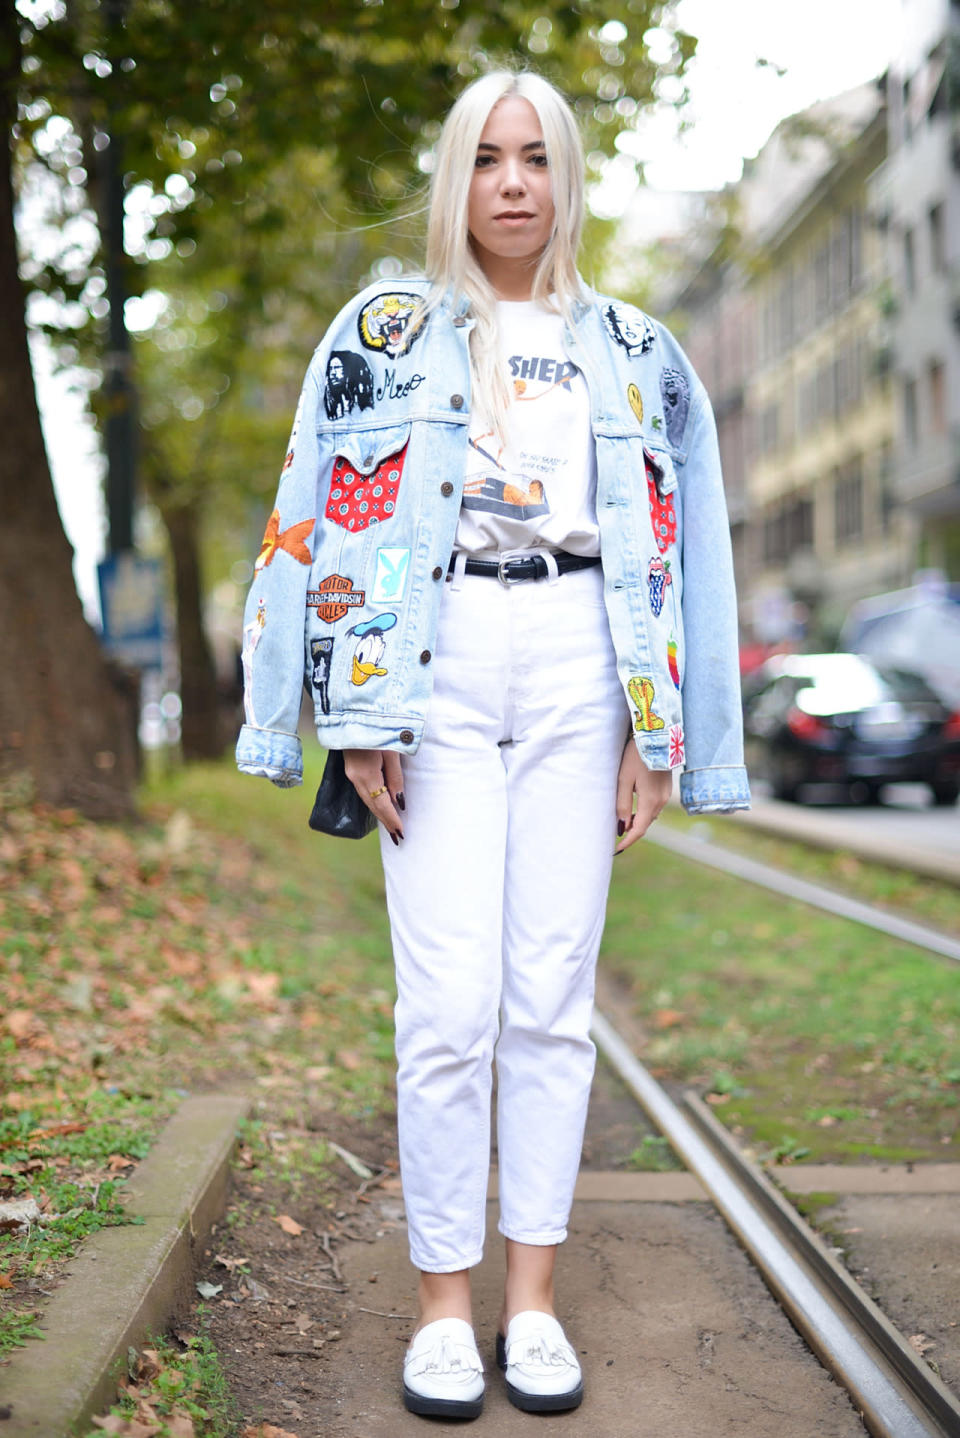 Michela Milesi is casual-cool in patched denim jacket on top of an all-white outfit